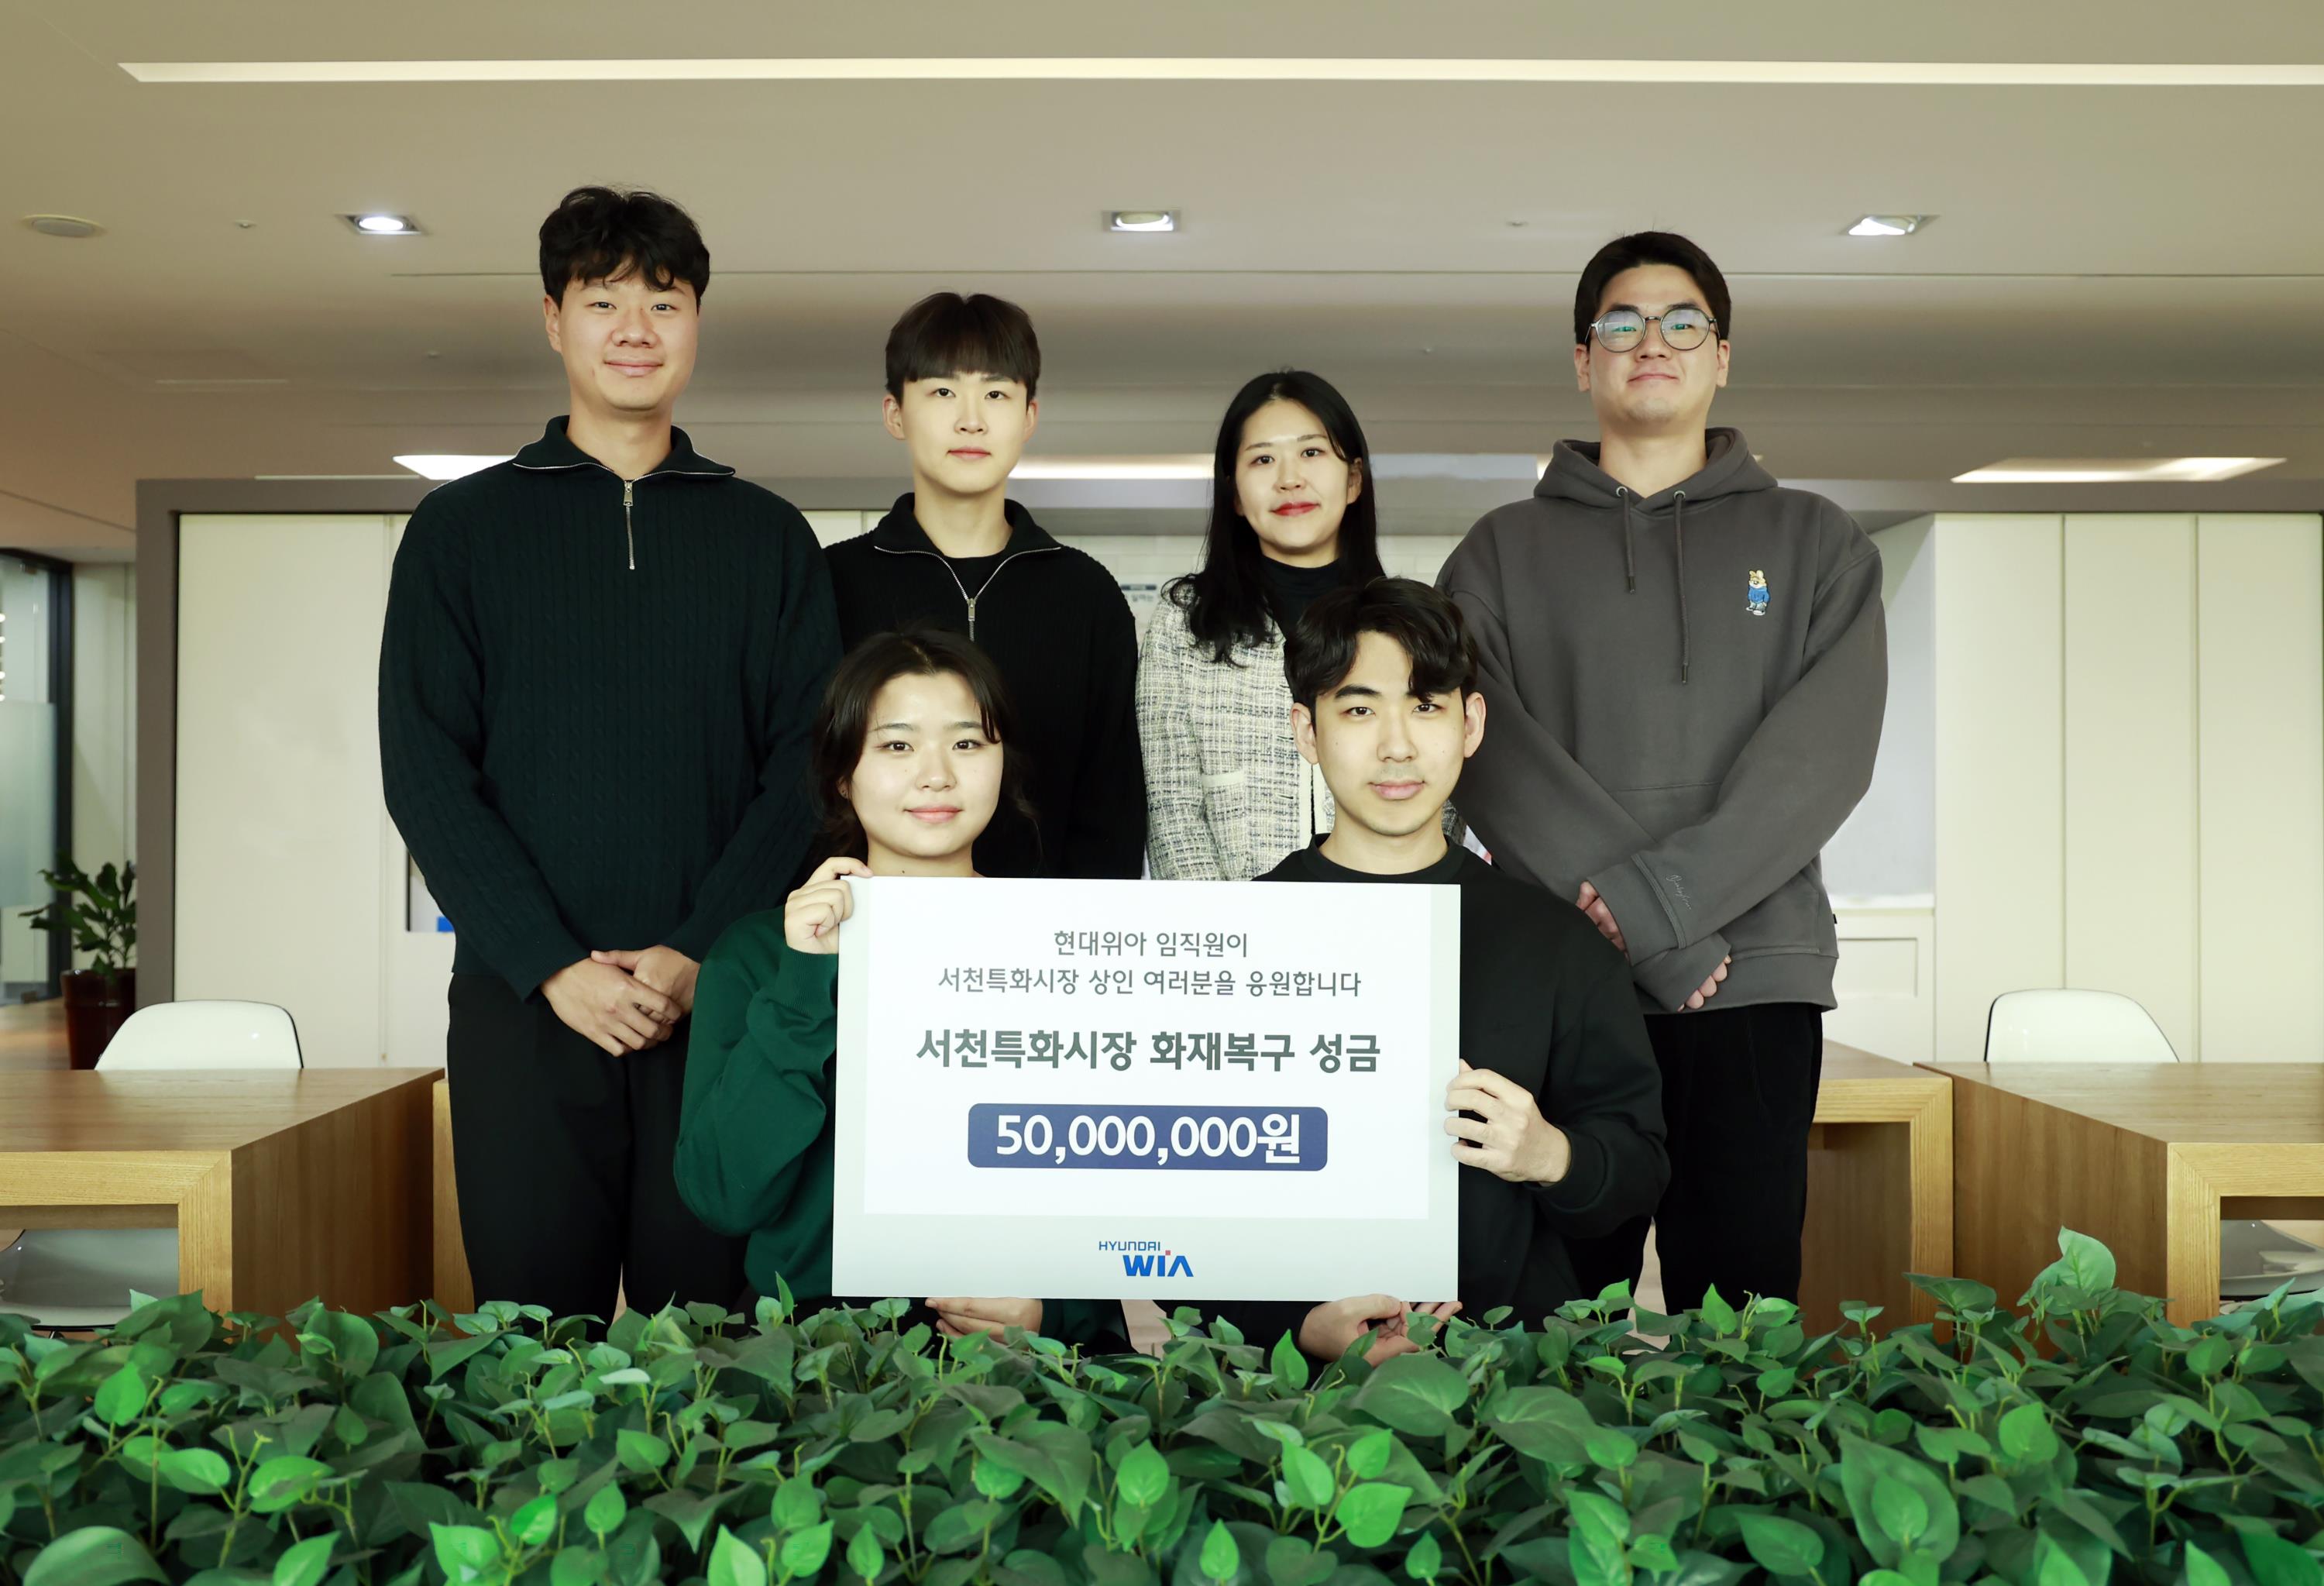 On February 1st, employees of HYUNDAI WIA are taking photos after collecting and delivering ‘Fire Recovery Funds for Seocheon Specialty Market’. HYUNDAI WIA added the company donation of 25 million won to the original 25 million won raised by the employees to help the merchants of Seocheon Specialty Market. Courtesy of HYUNDAI WIA.